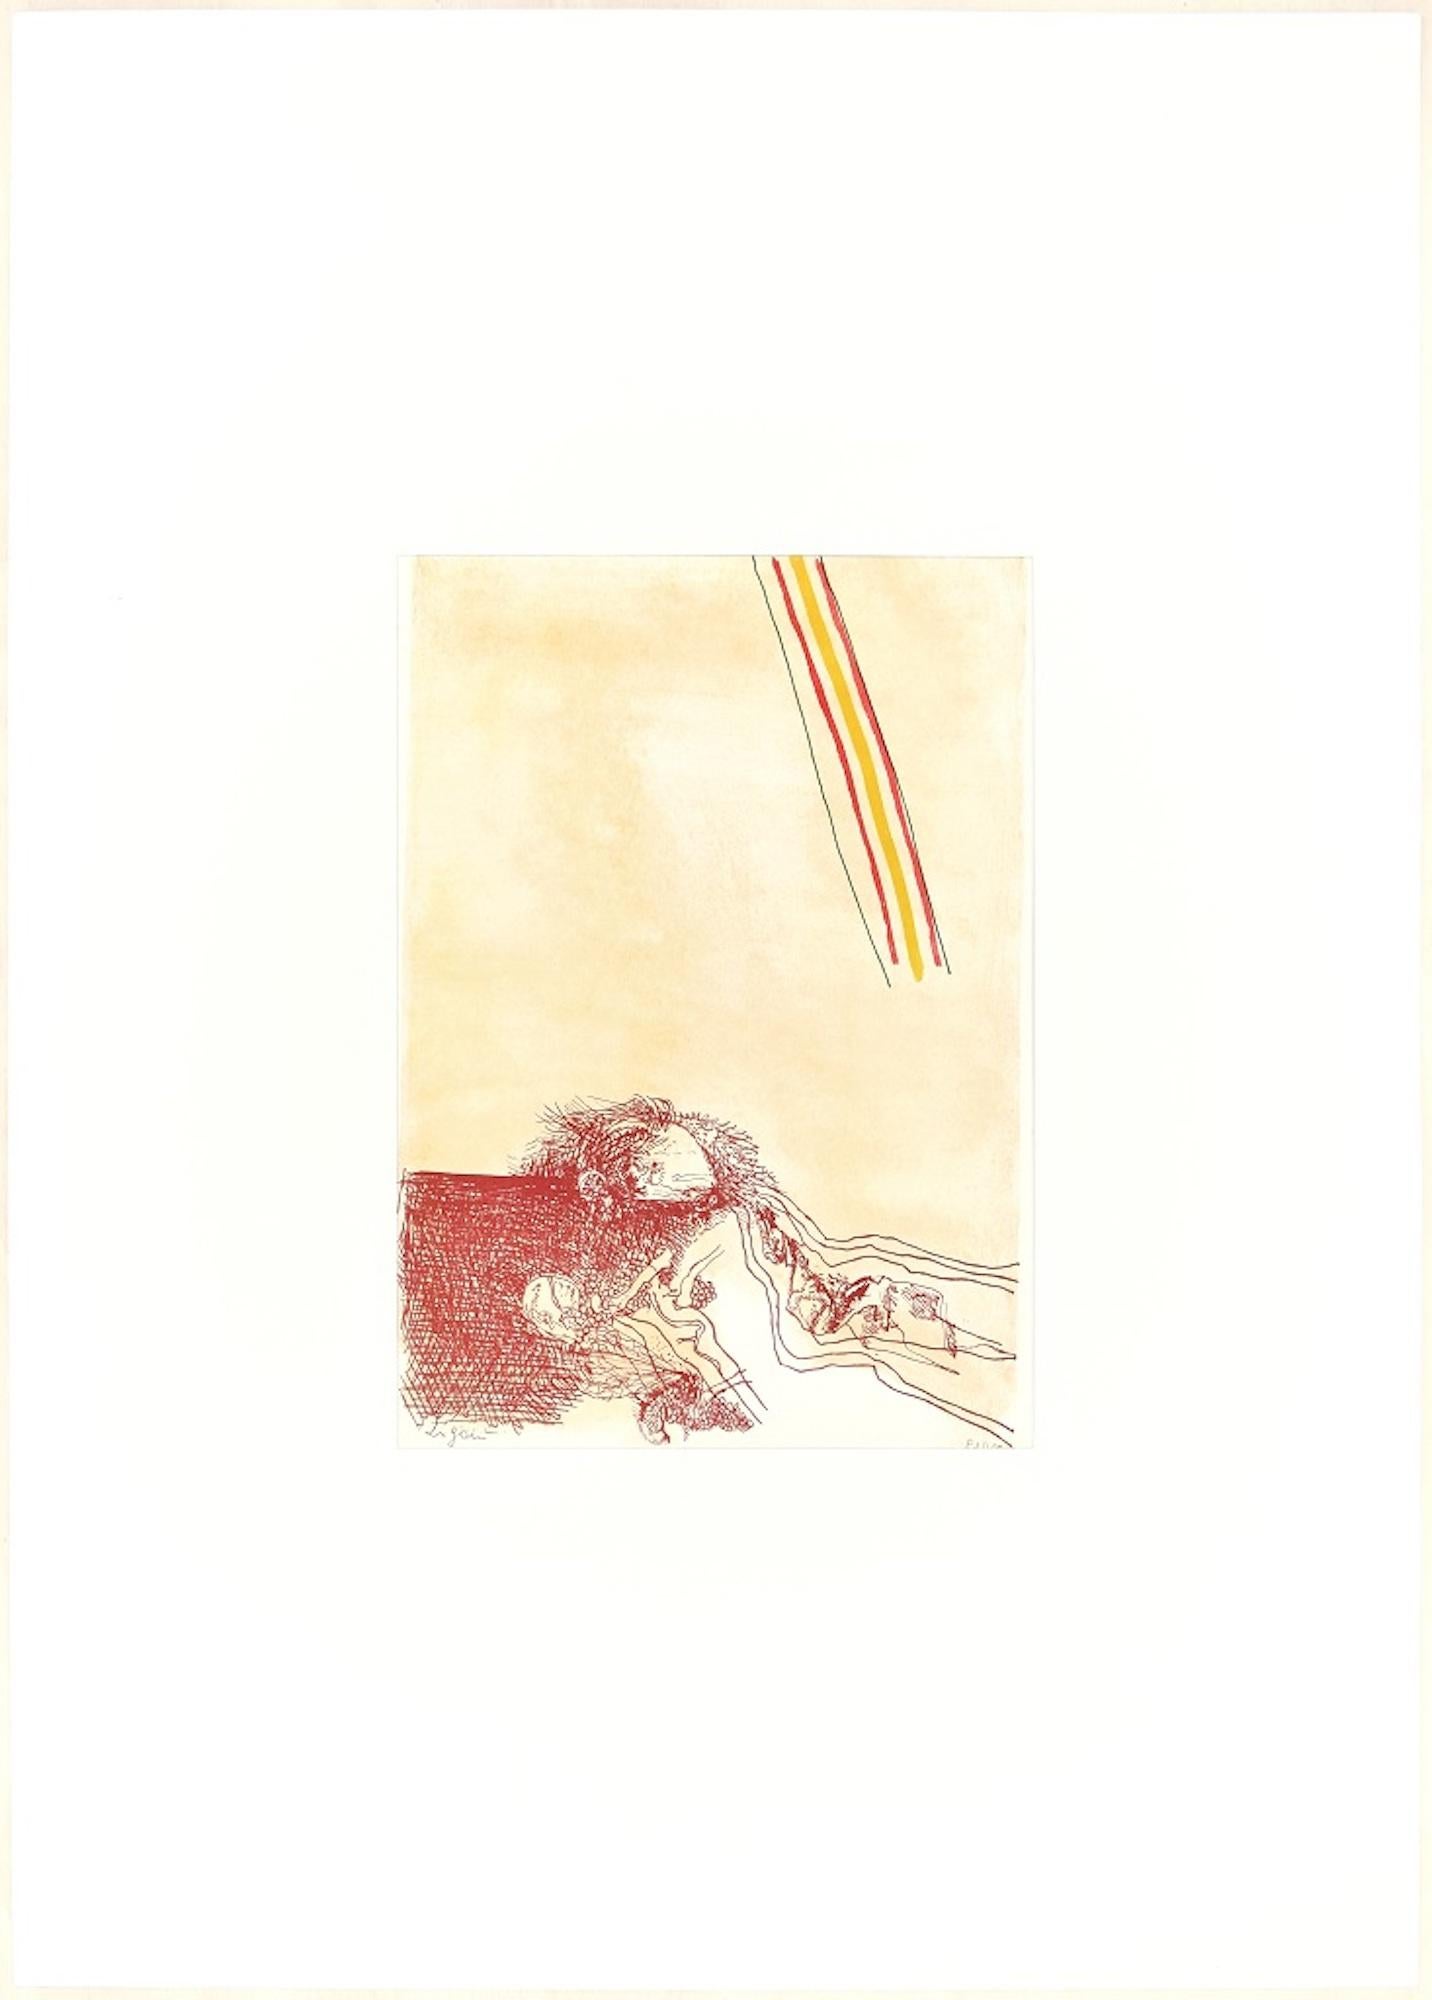 Untitled is a wonderful colored lithograph on paper, realized at the end of XX century by the Italian artist, Giuseppe Zigaina, and published by La Nuova Foglio, the publishing house of Macerata, as it is impressed on the sheet on the lower right